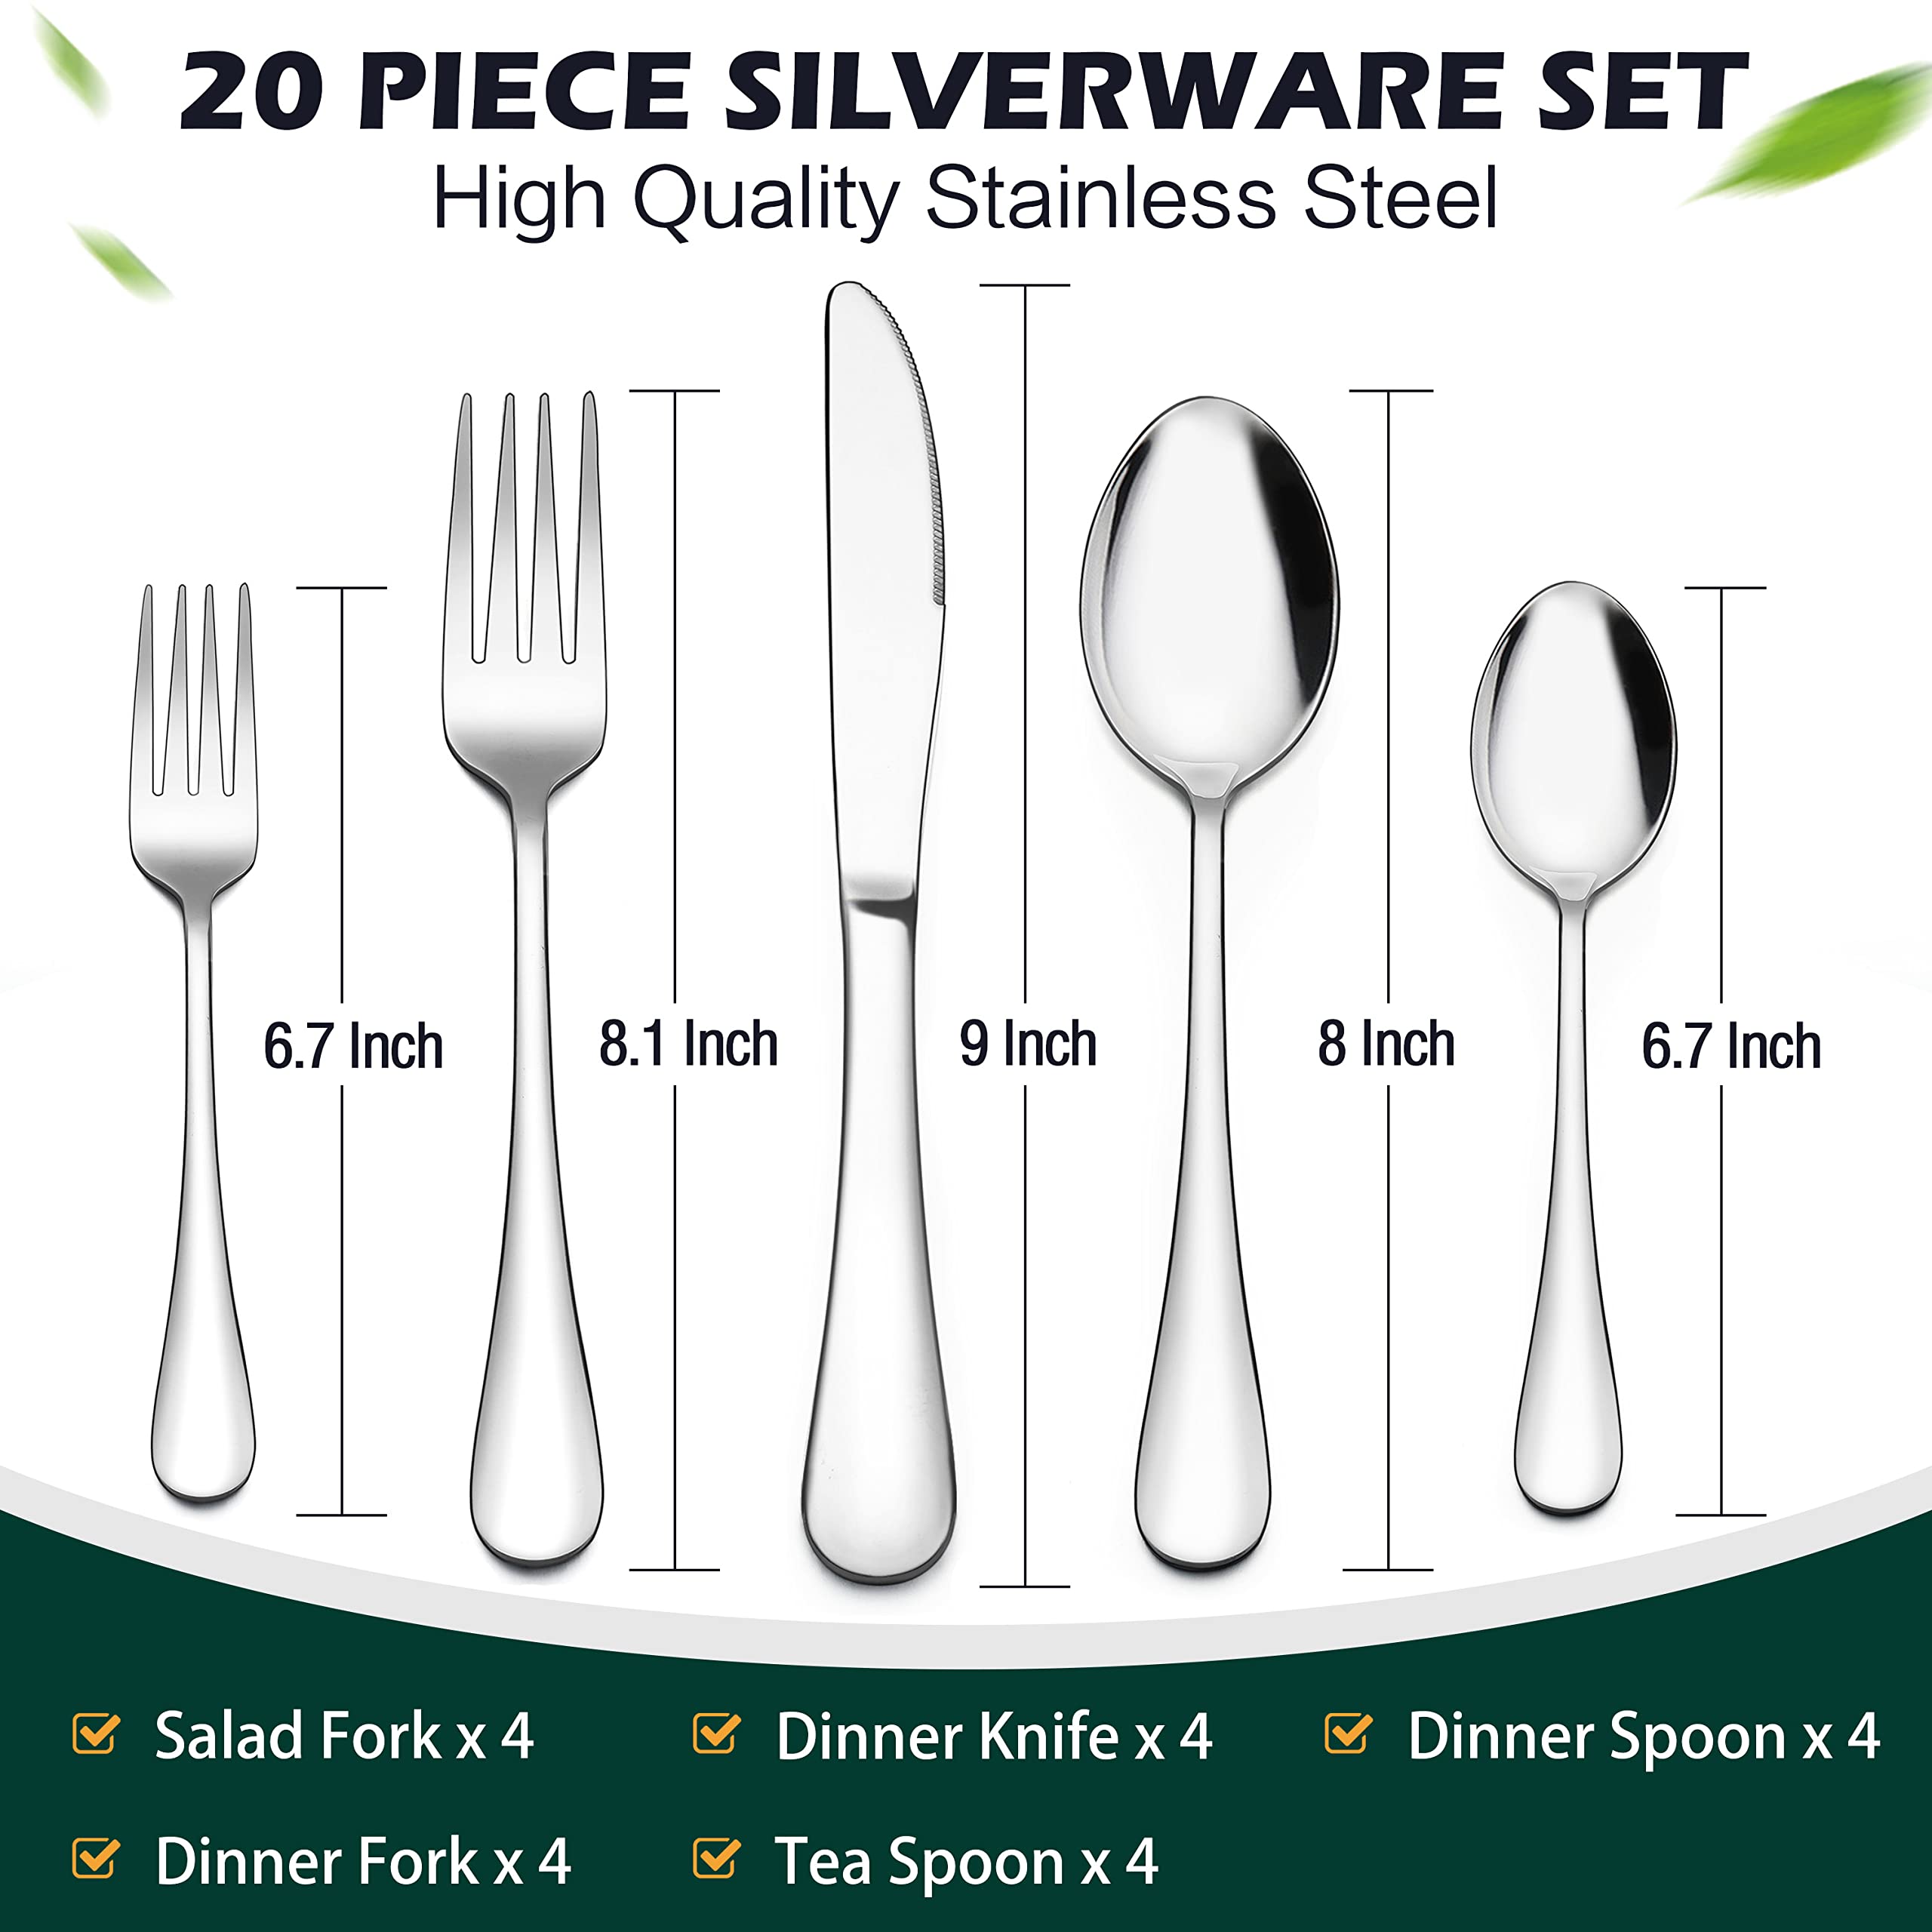 LIANYU 20 Piece Silverware Flatware Cutlery Set, Stainless Steel Utensils Service for 4, Include Knife Fork Spoon, Mirror Polished, Dishwasher Safe